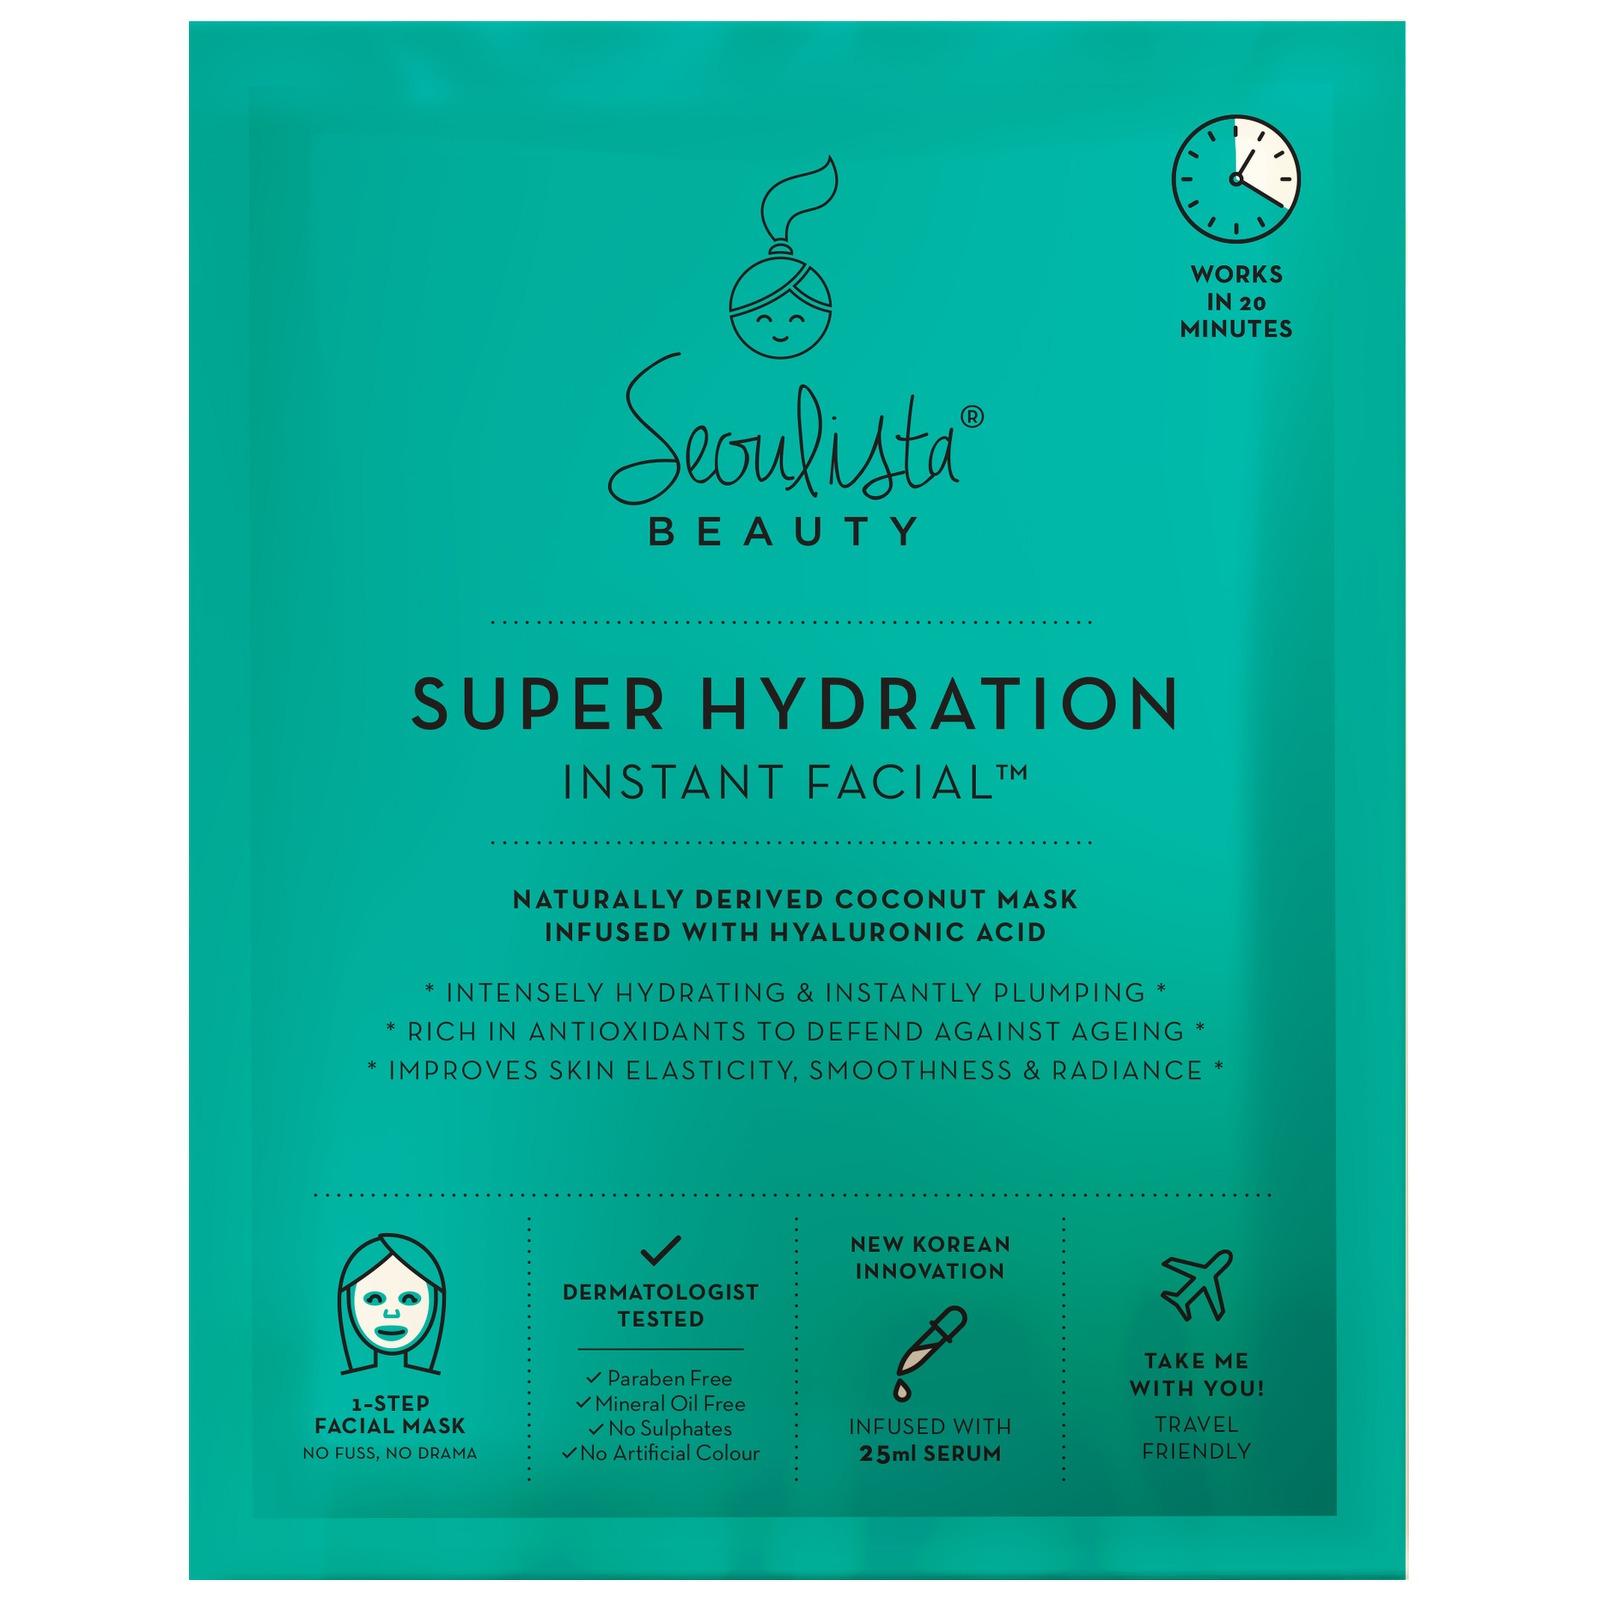 Super Hydration Instant Facial